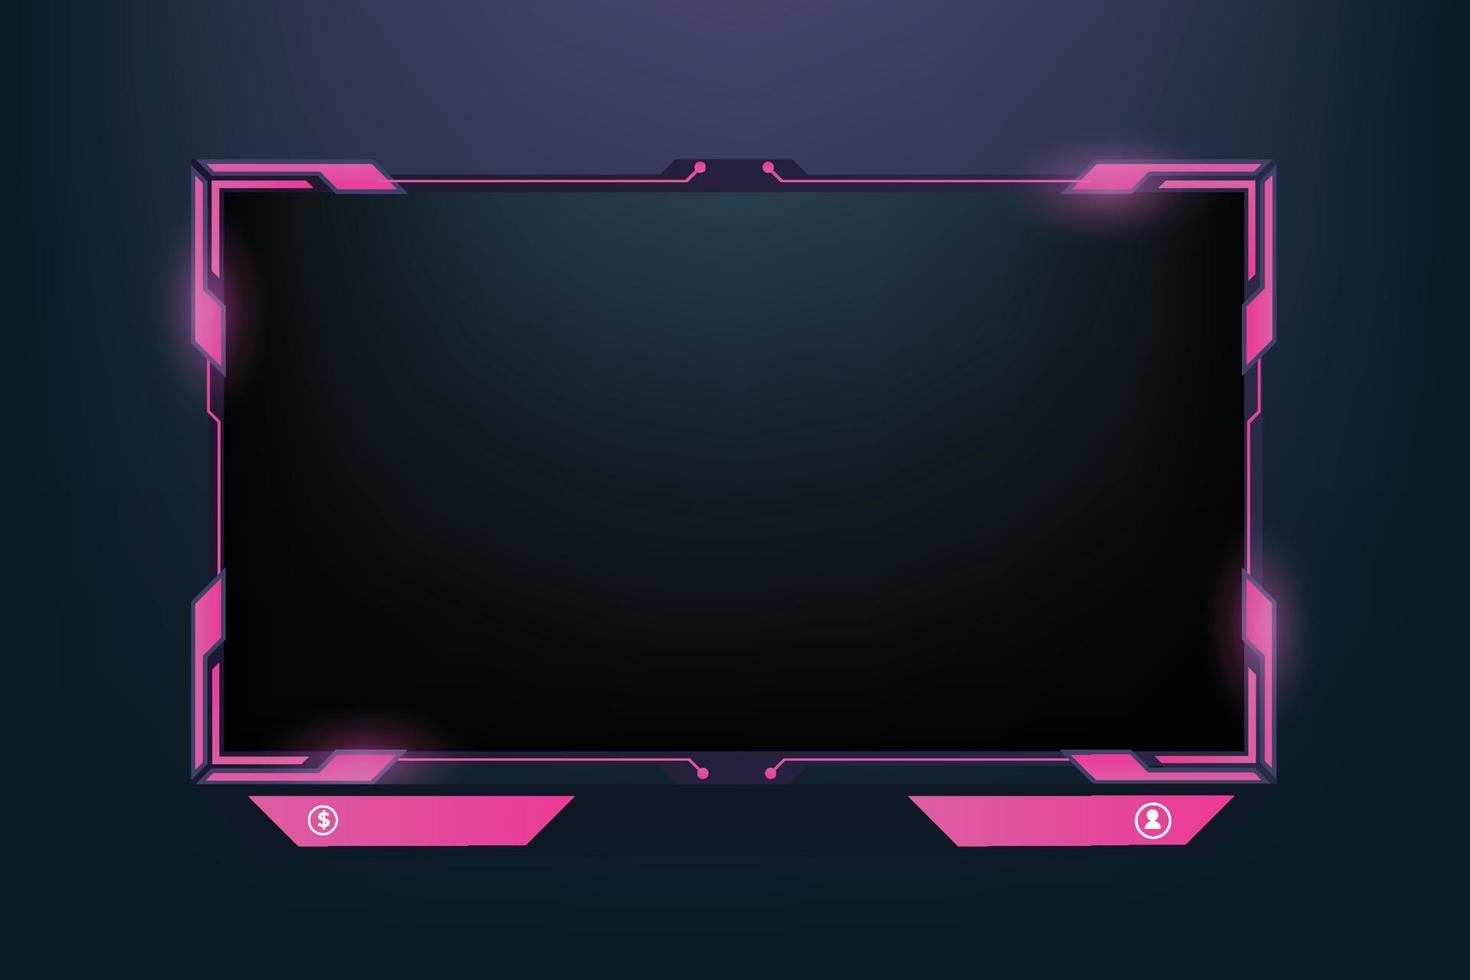 Modern streaming screen interface decoration for girl gamers. Futuristic gaming overlay design with abstract shapes and buttons. Live gaming screen border design with pink color shapes. vector